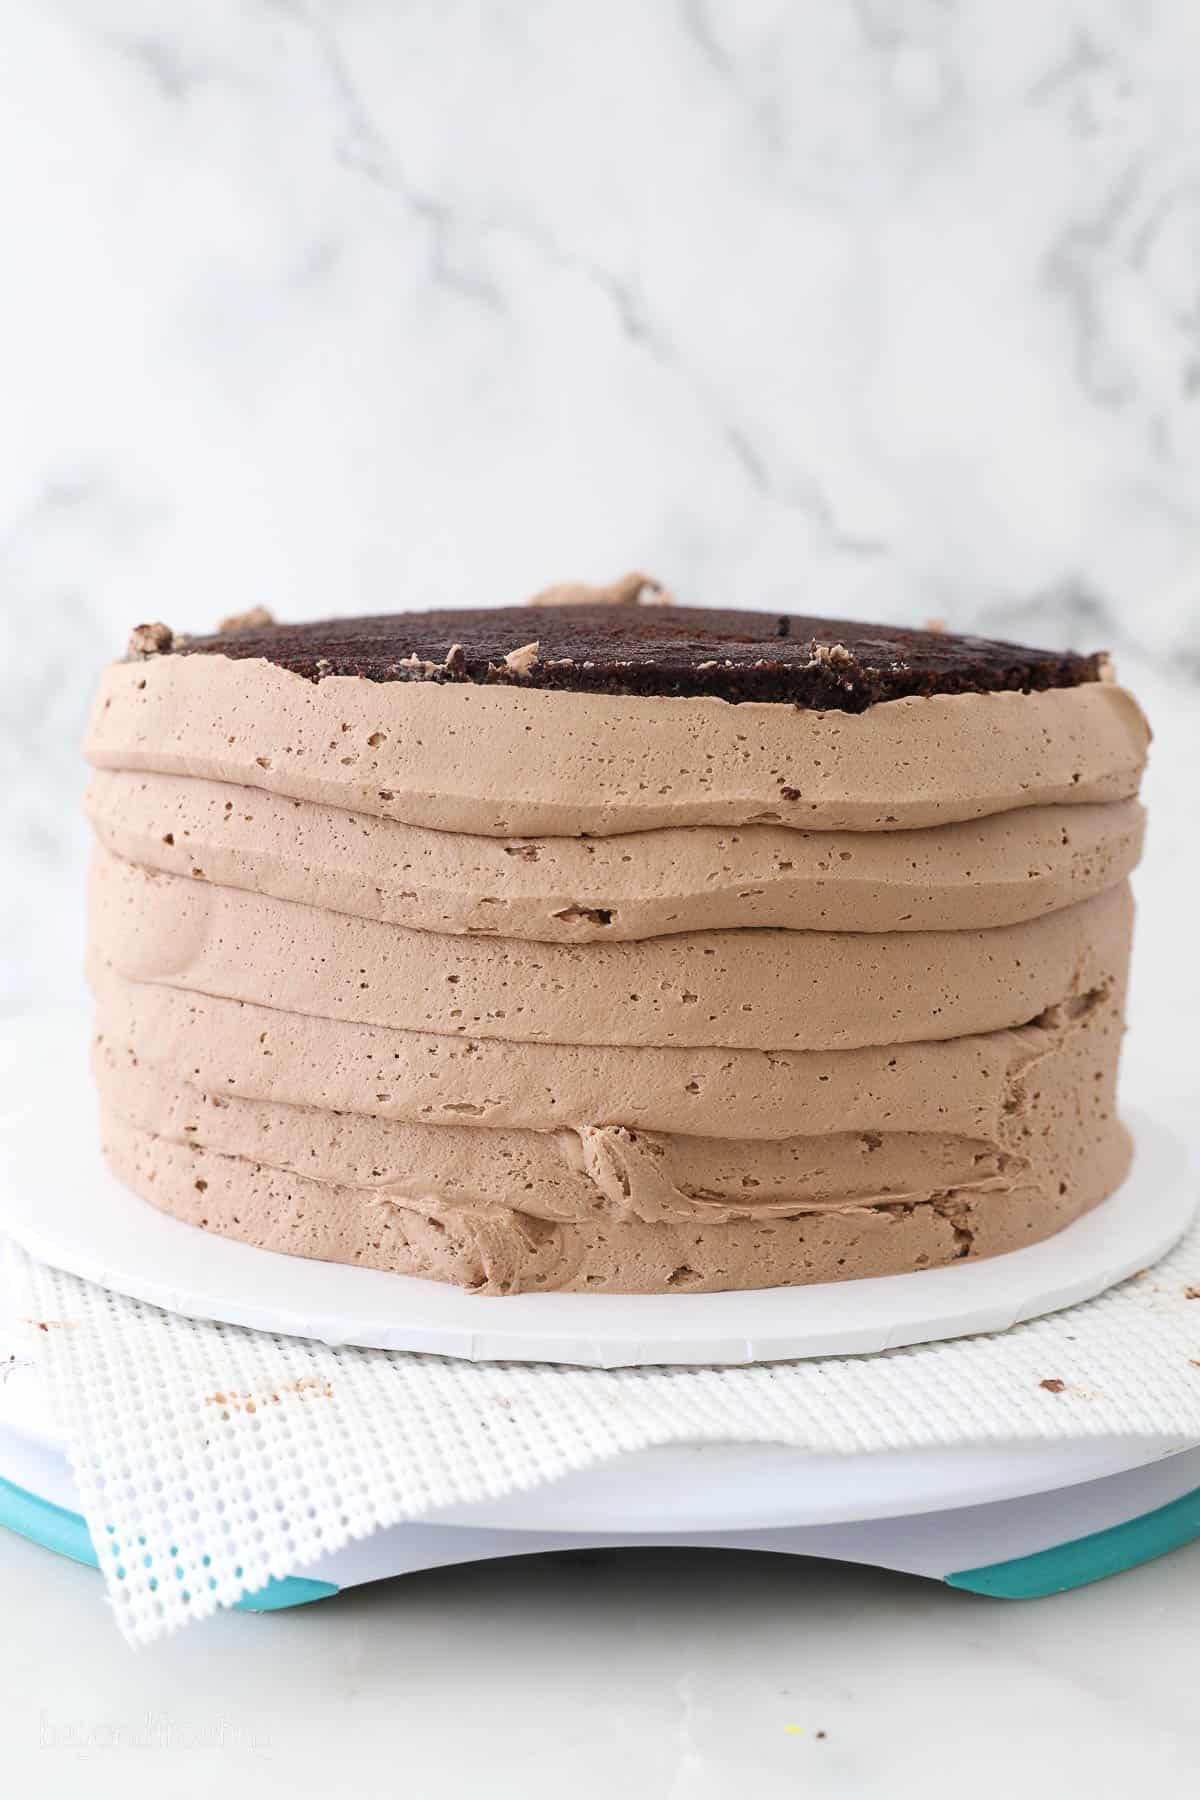 Nutella frosting is completely piped on outside of chocolate cake.